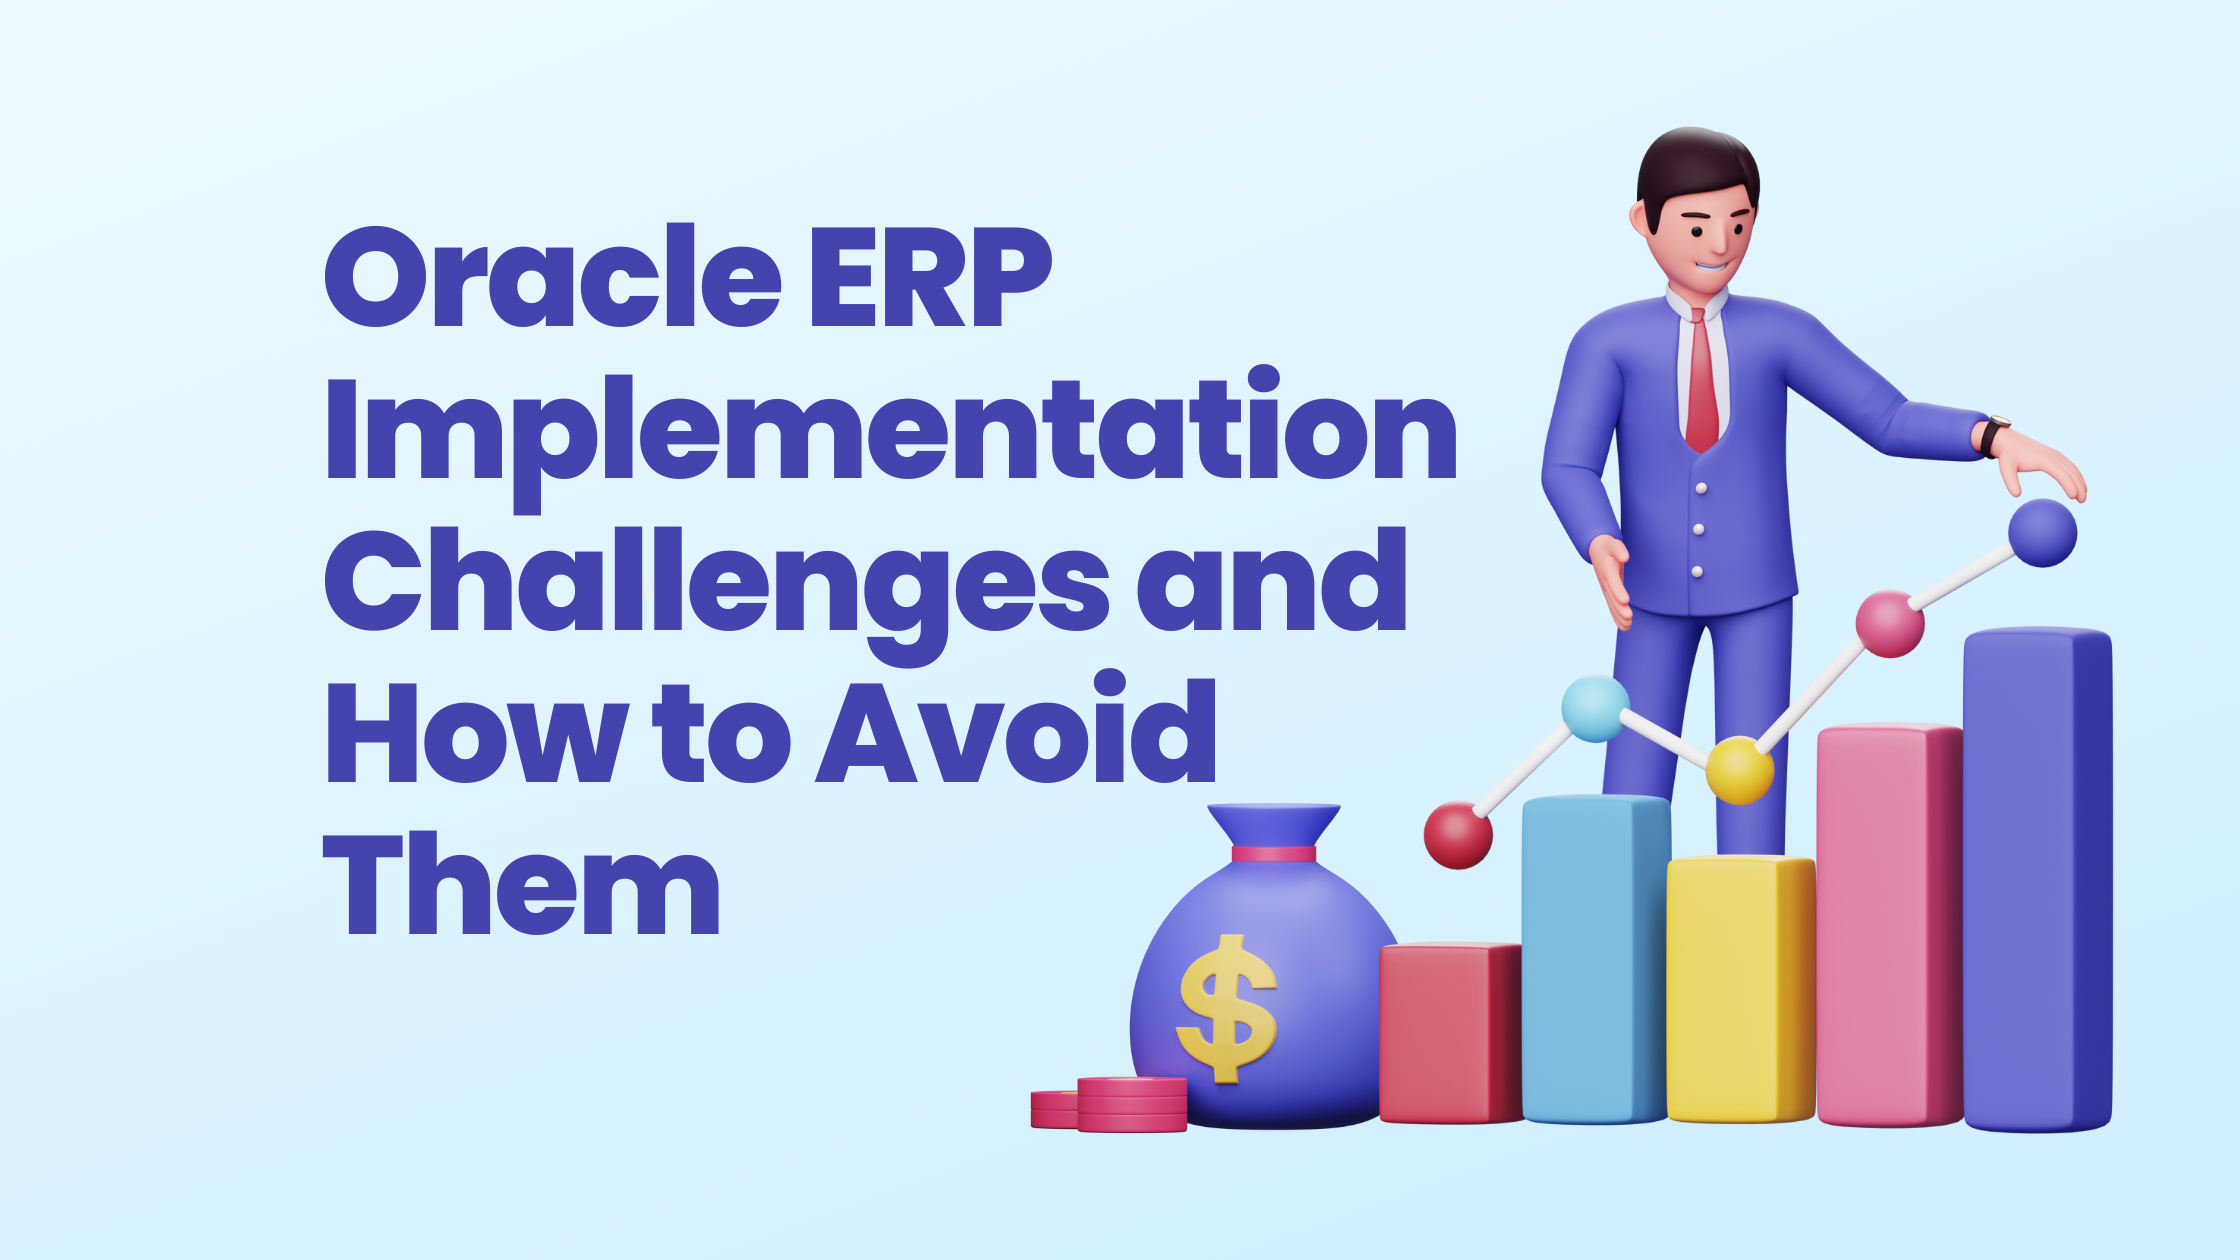 Oracle ERP Implementation Challenges and How to Avoid Them